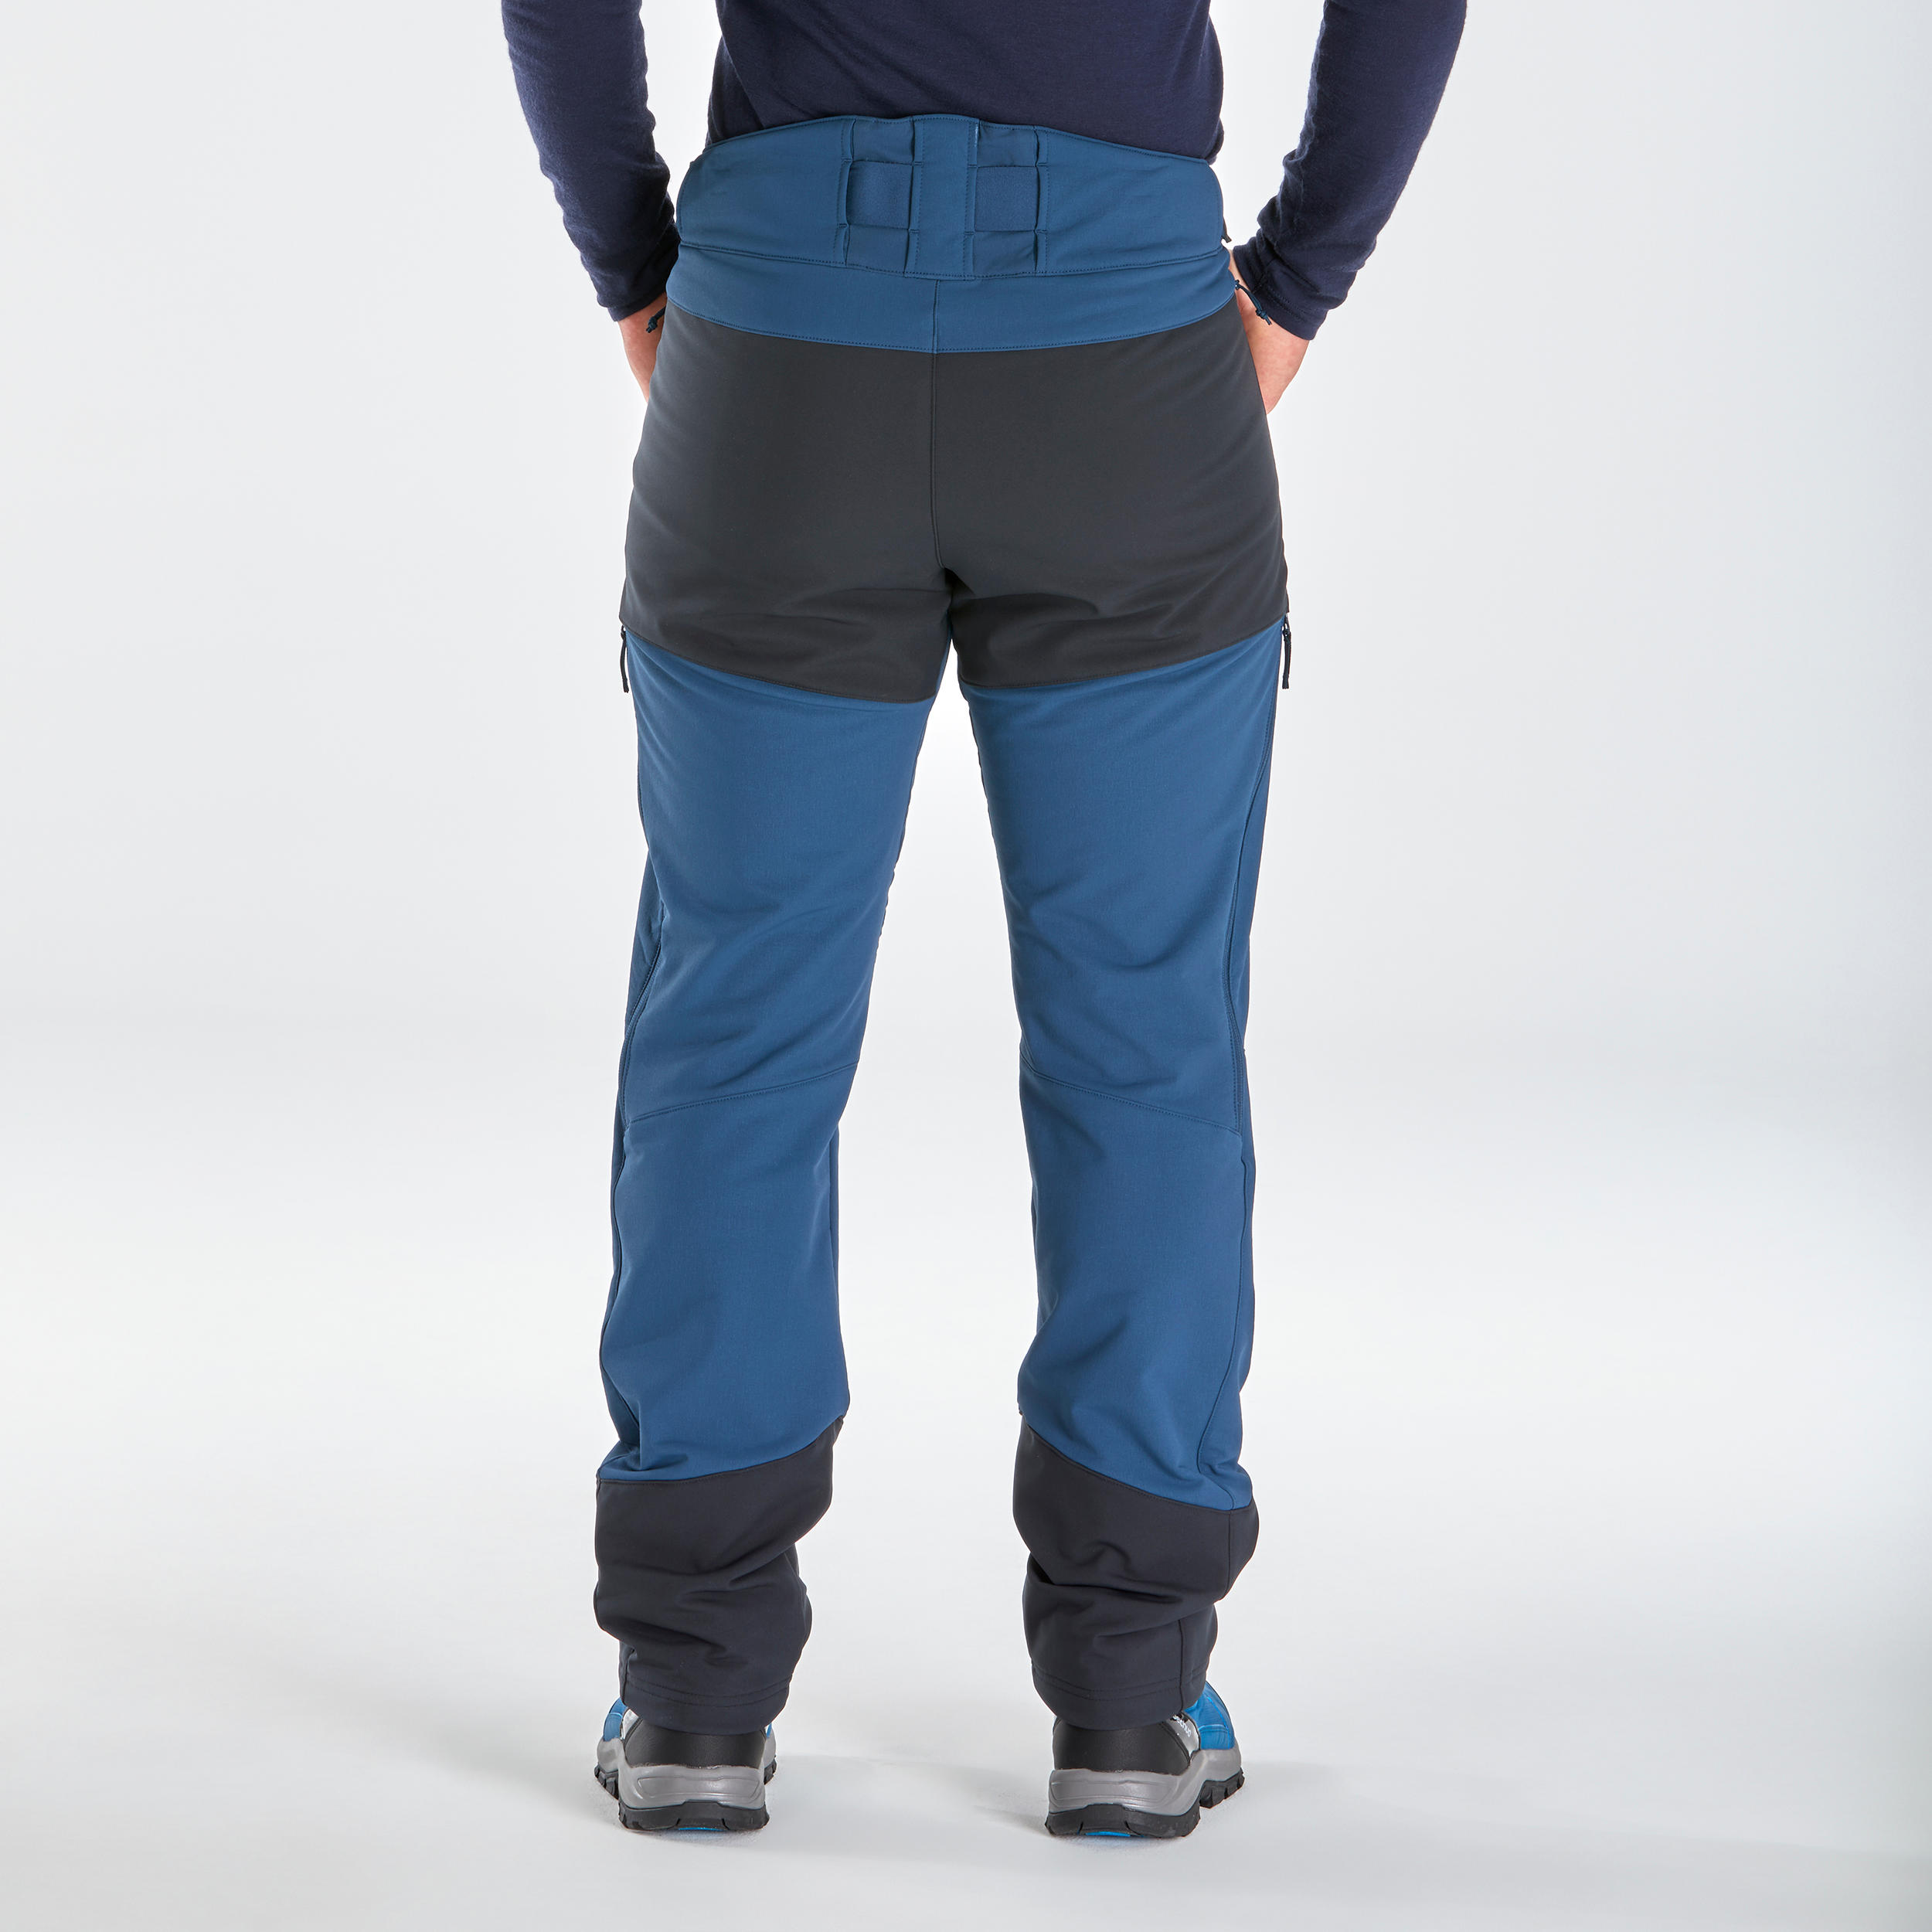 Men’s Warm Water-repellent Ventilated Hiking Trousers - SH500 MOUNTAIN VENTIL   7/10